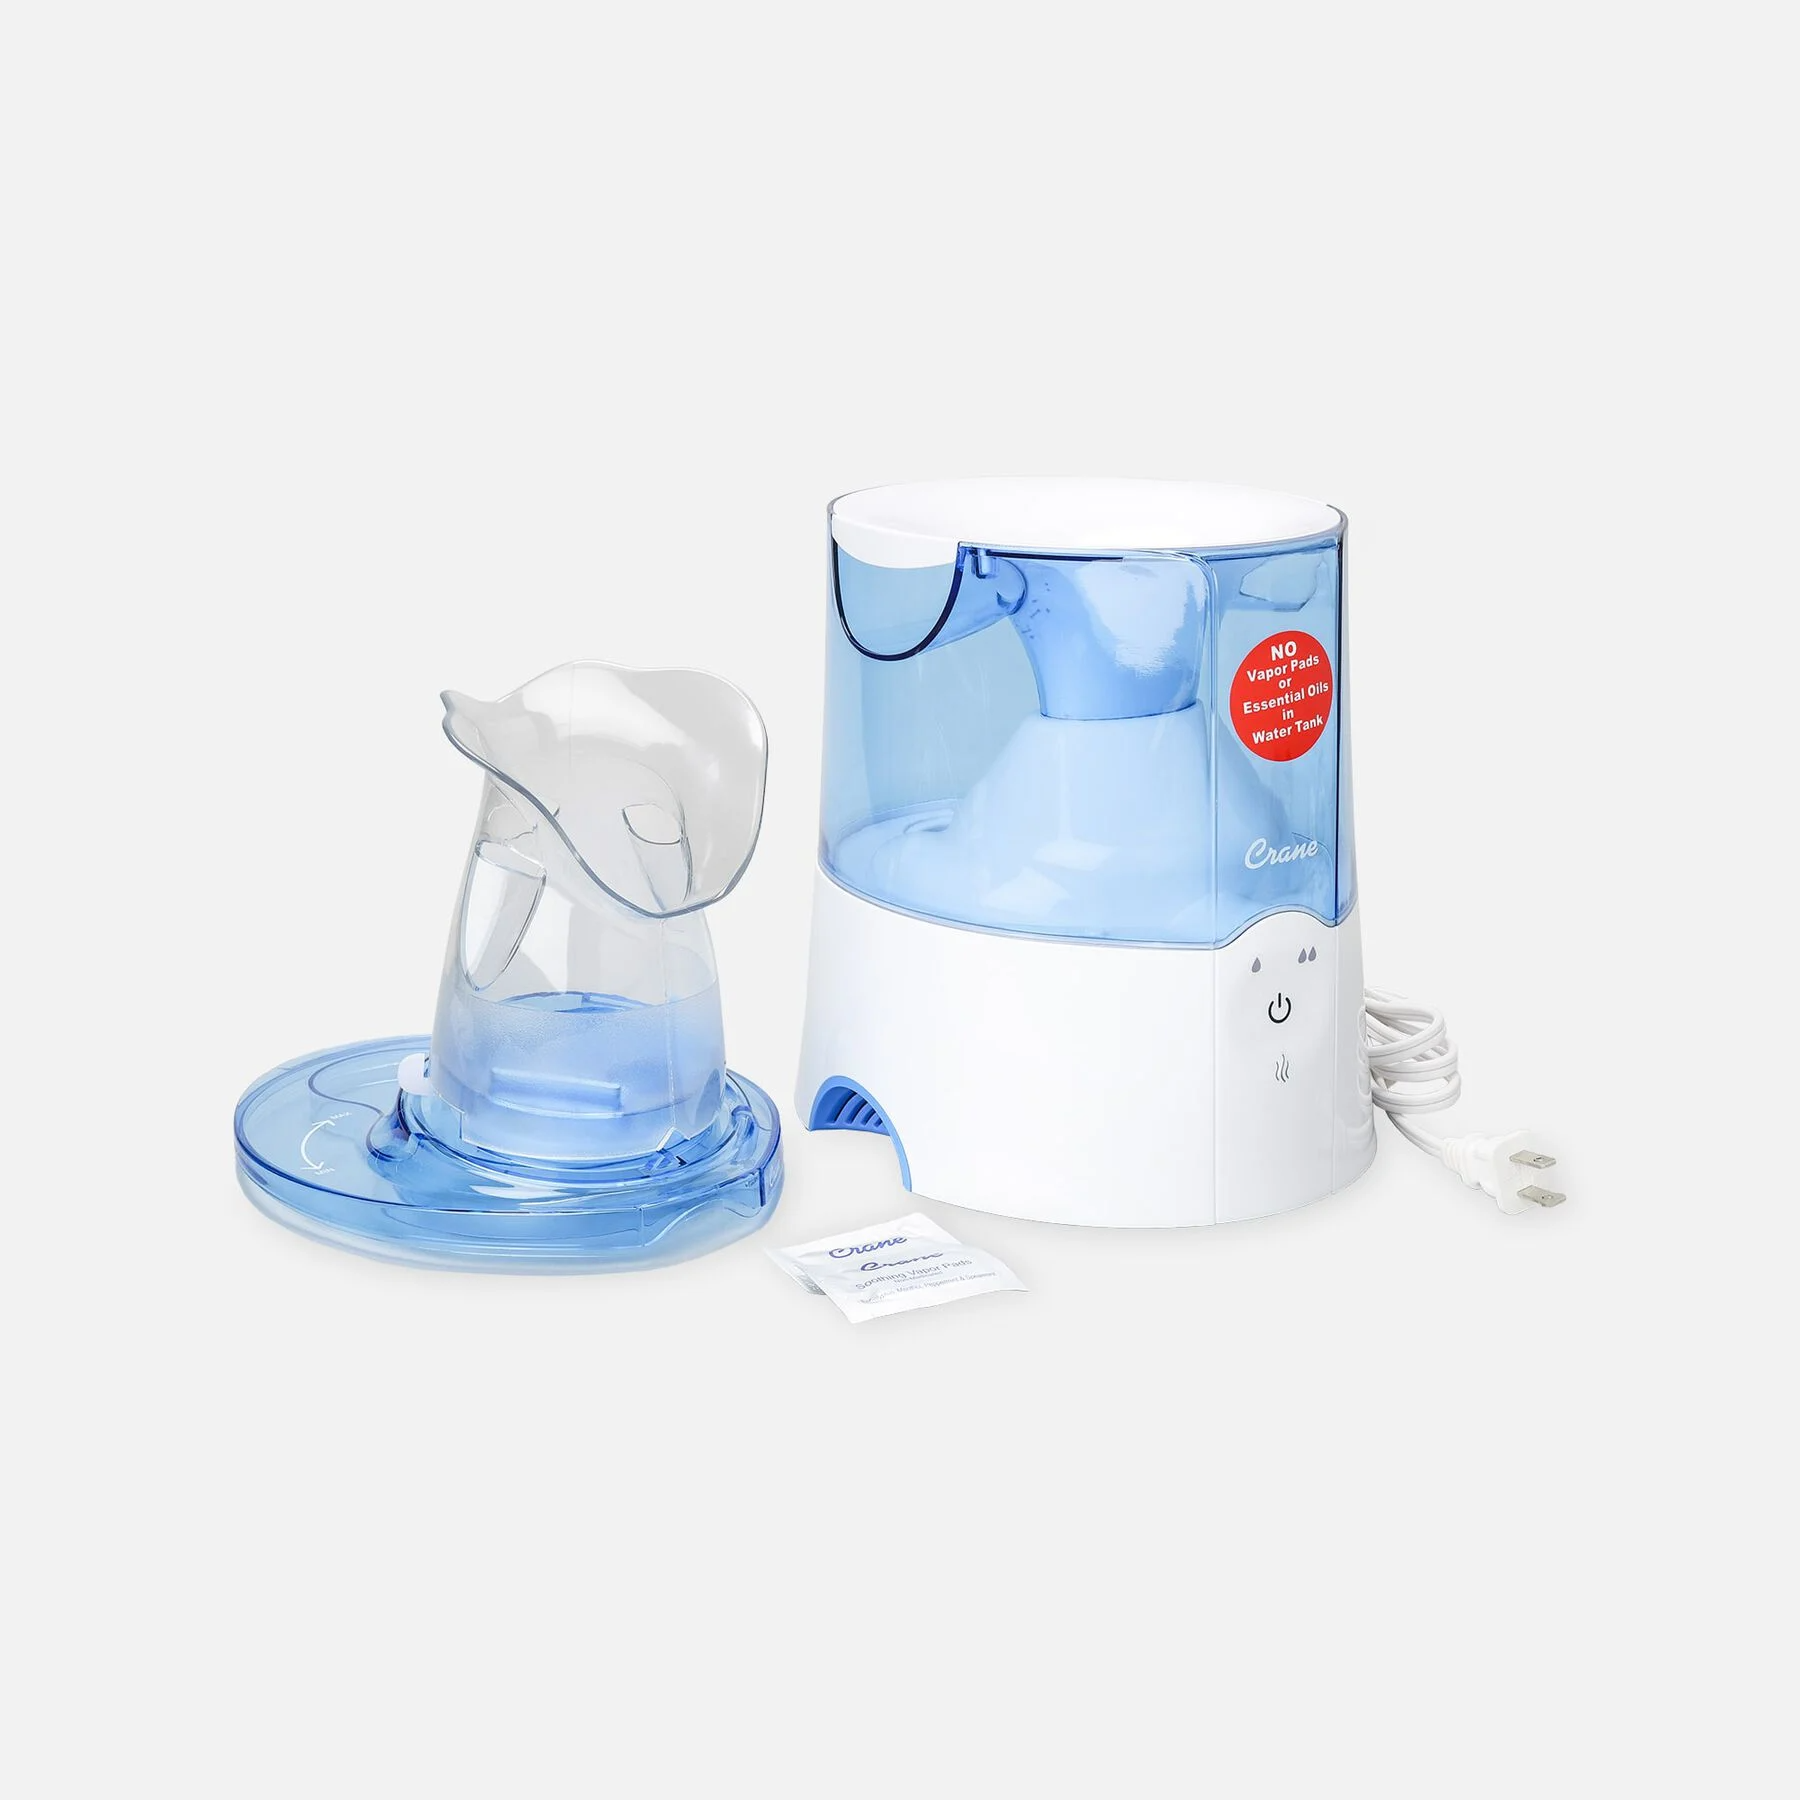 https://hips.hearstapps.com/vader-prod.s3.amazonaws.com/1670429700-crane-classic-2-in-1-warm-mist-humidifier-and-steam-inhaler-bluewhite-30478-02-1670429692.png